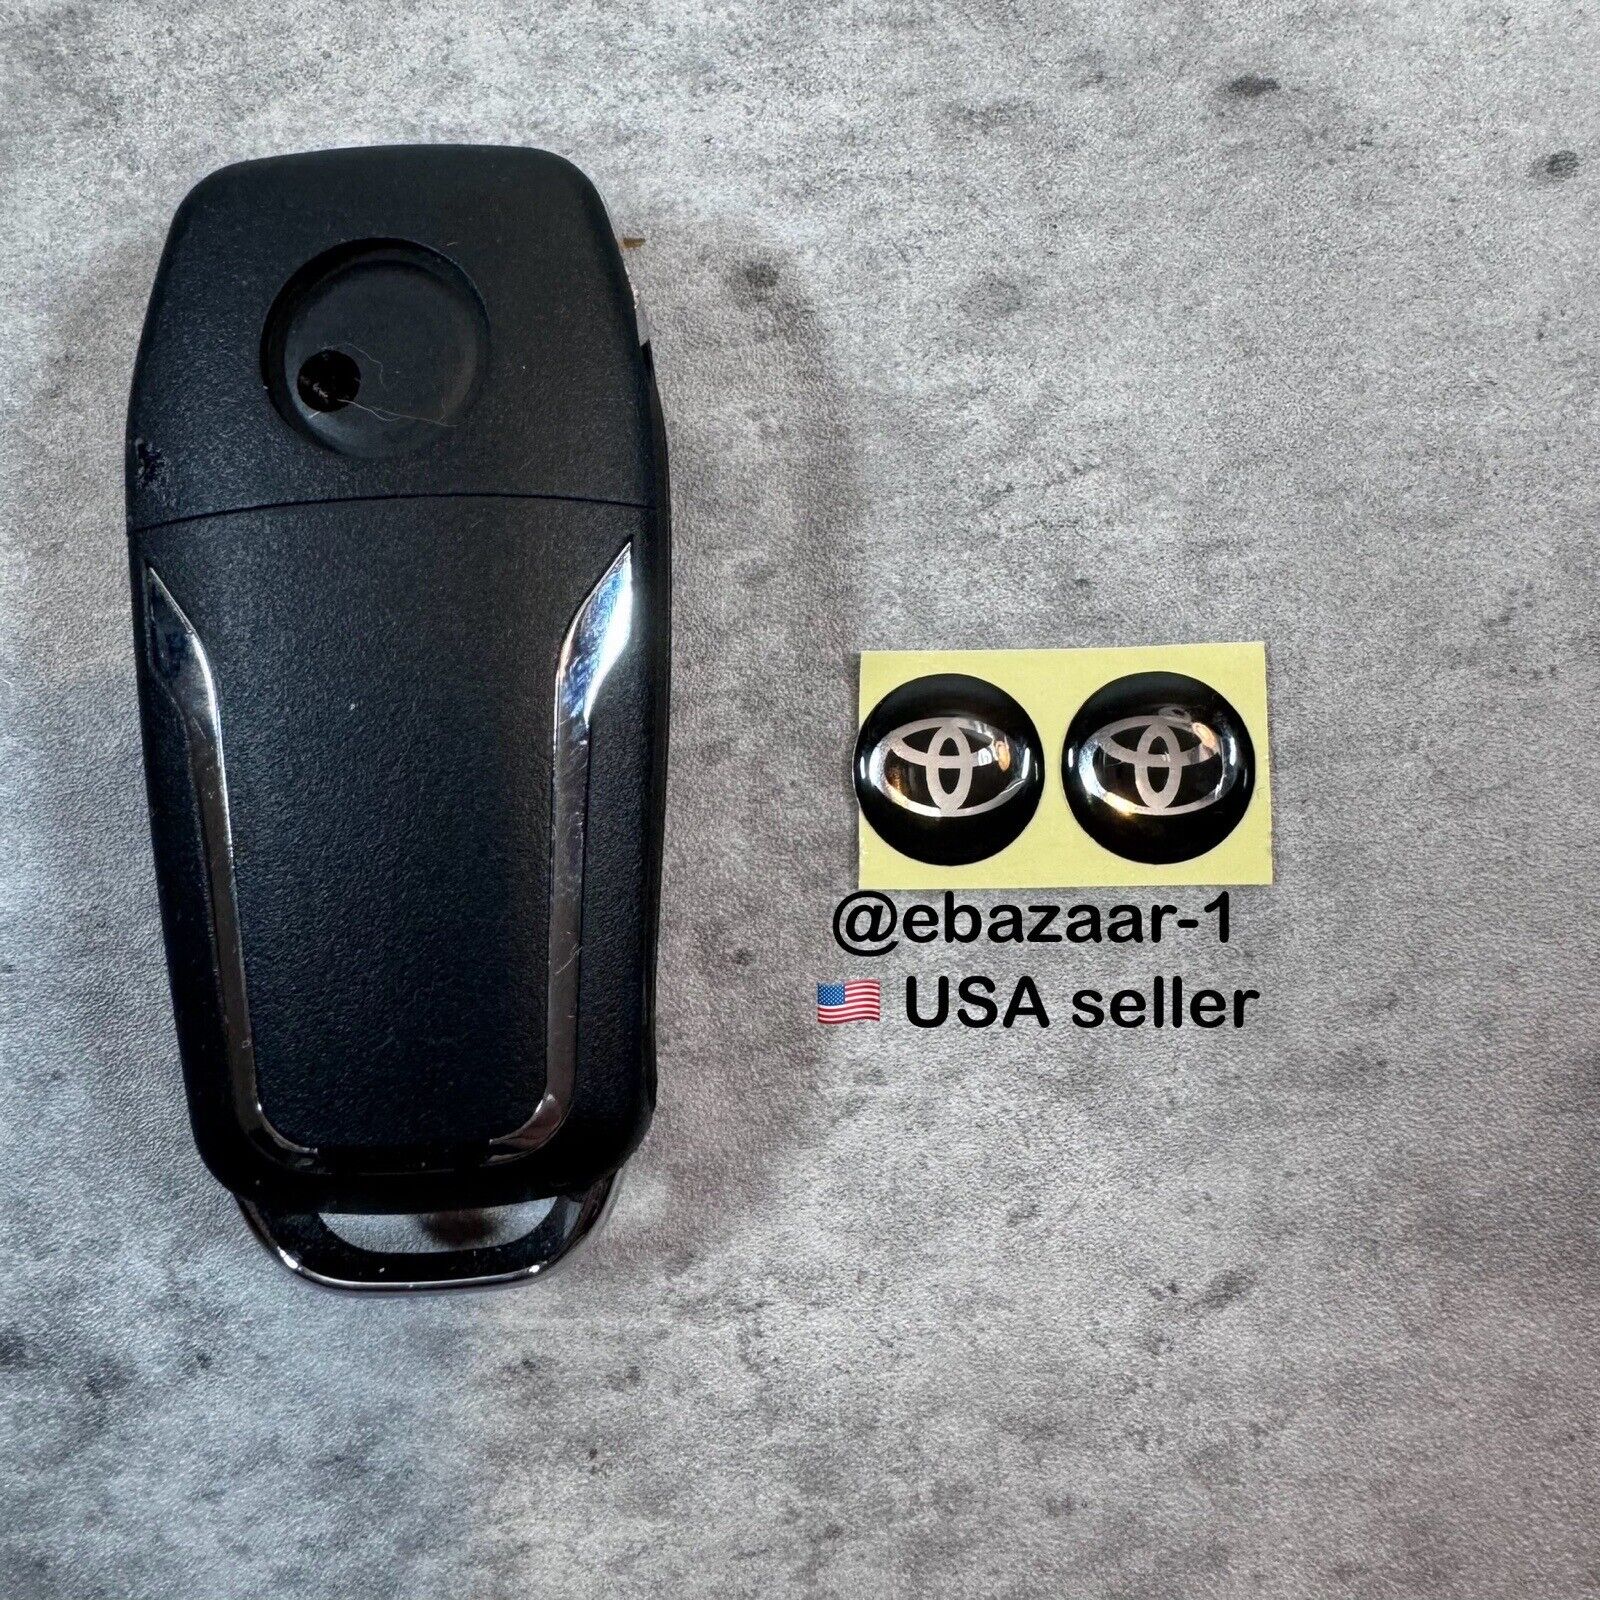 2x 14 mm Emblems For Toyota Key Fob Replacement Stickers USA SELLER 🇺🇸